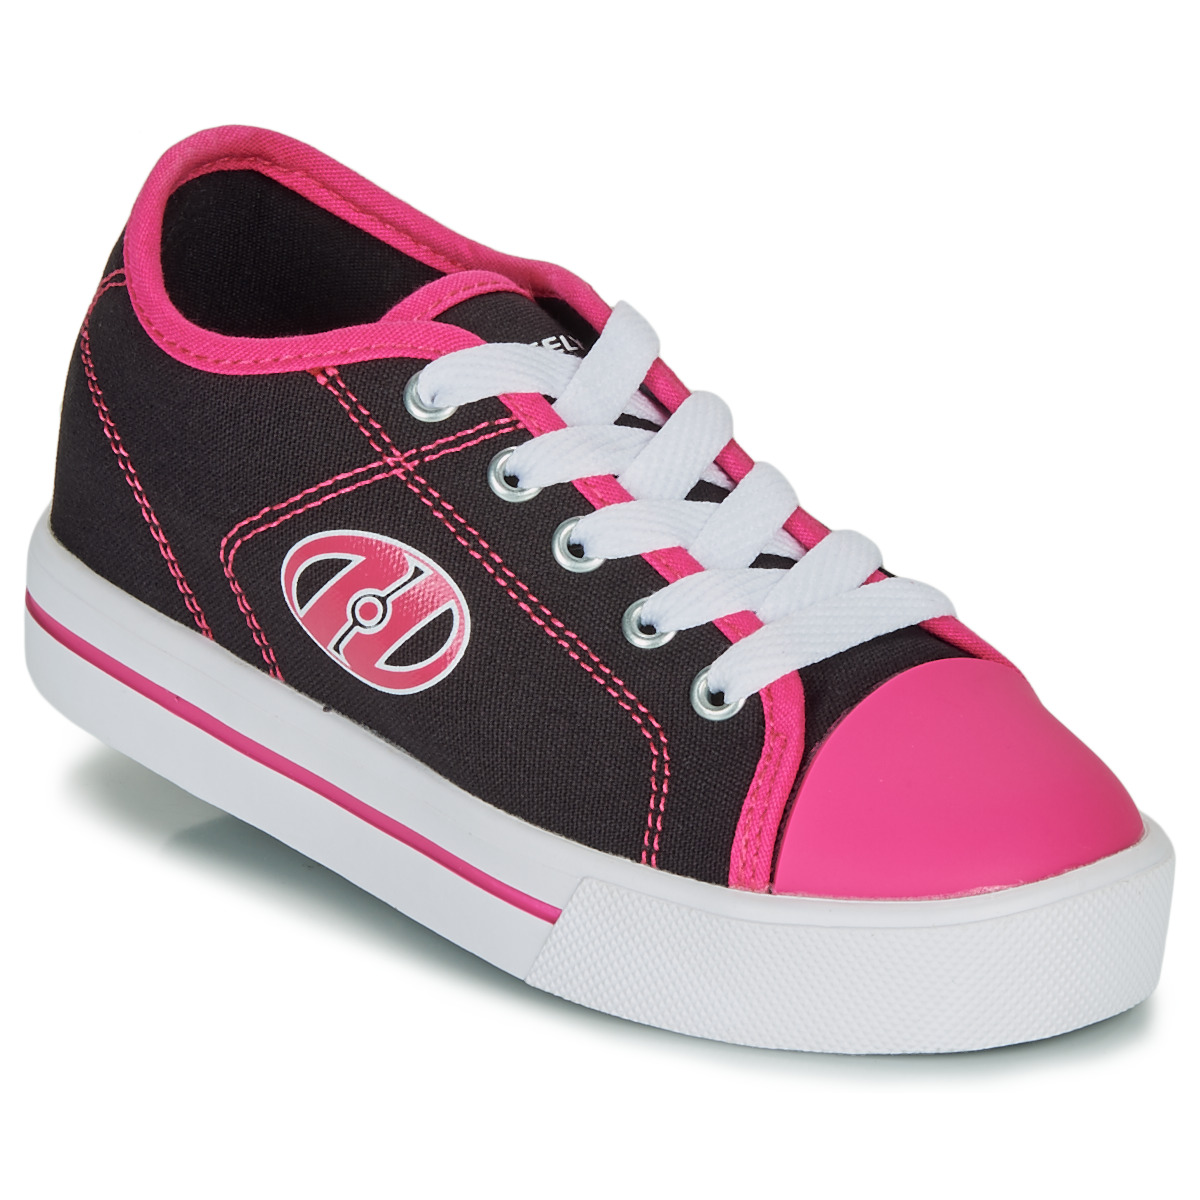 Heelys CLASSIC X2 / Pink - delivery | Spartoo NET ! - Shoes Wheeled shoes Child USD/$70.50